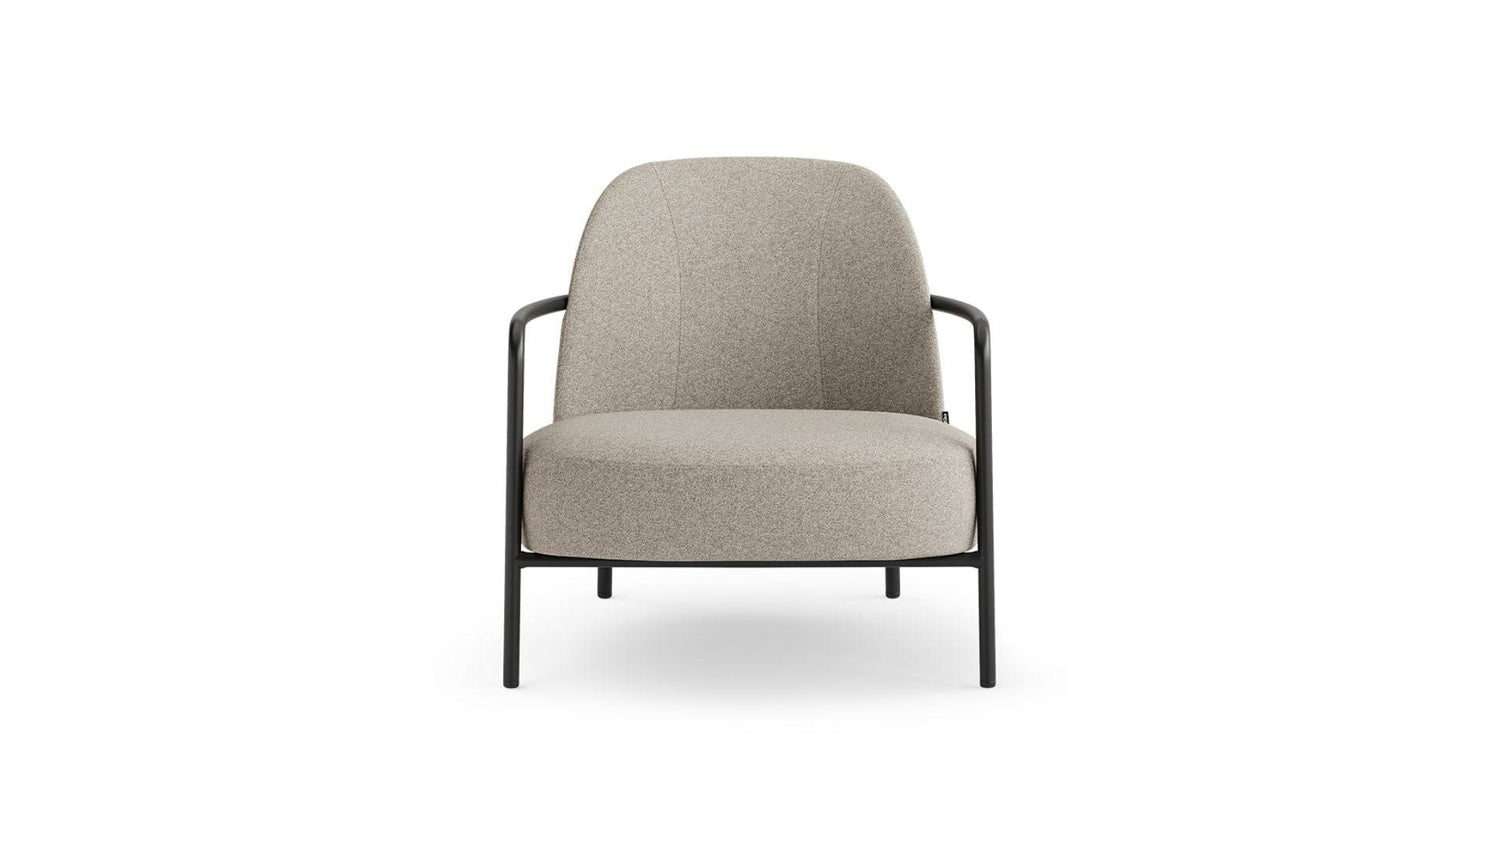 Soft Seating Ferno lounge chair